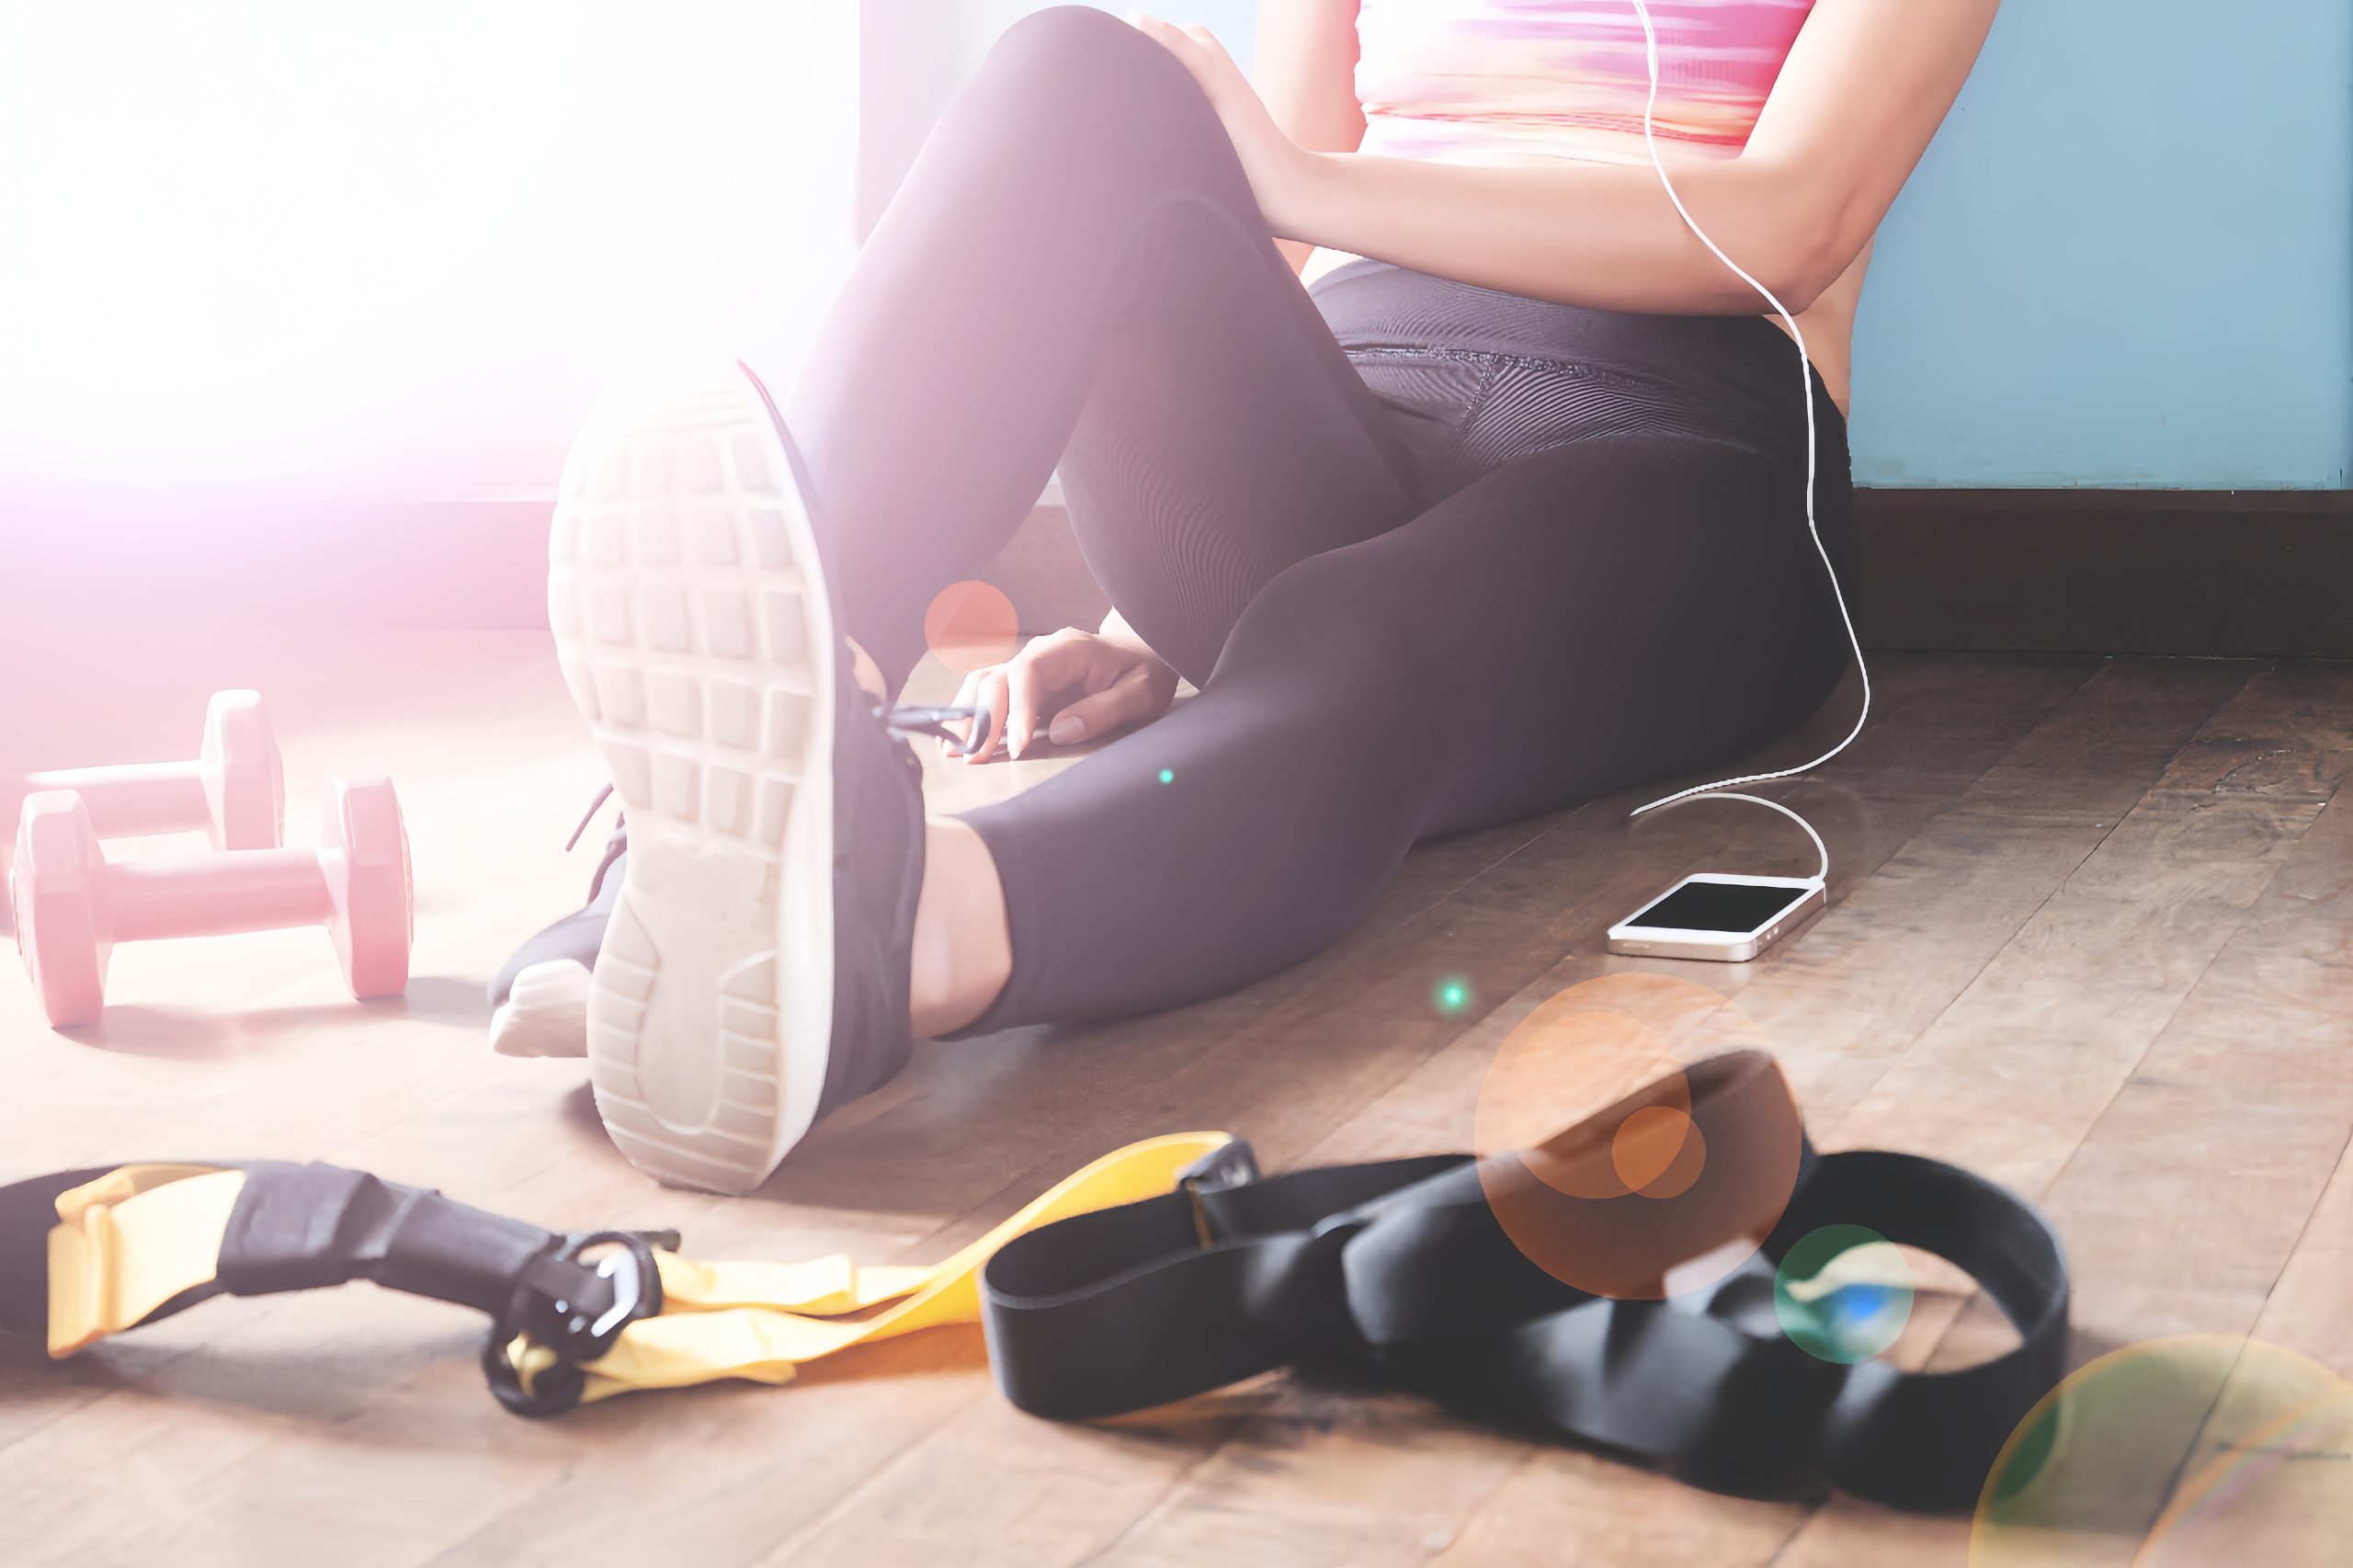 Budget-friendly fitness gear: Affordable Exercise Equipment